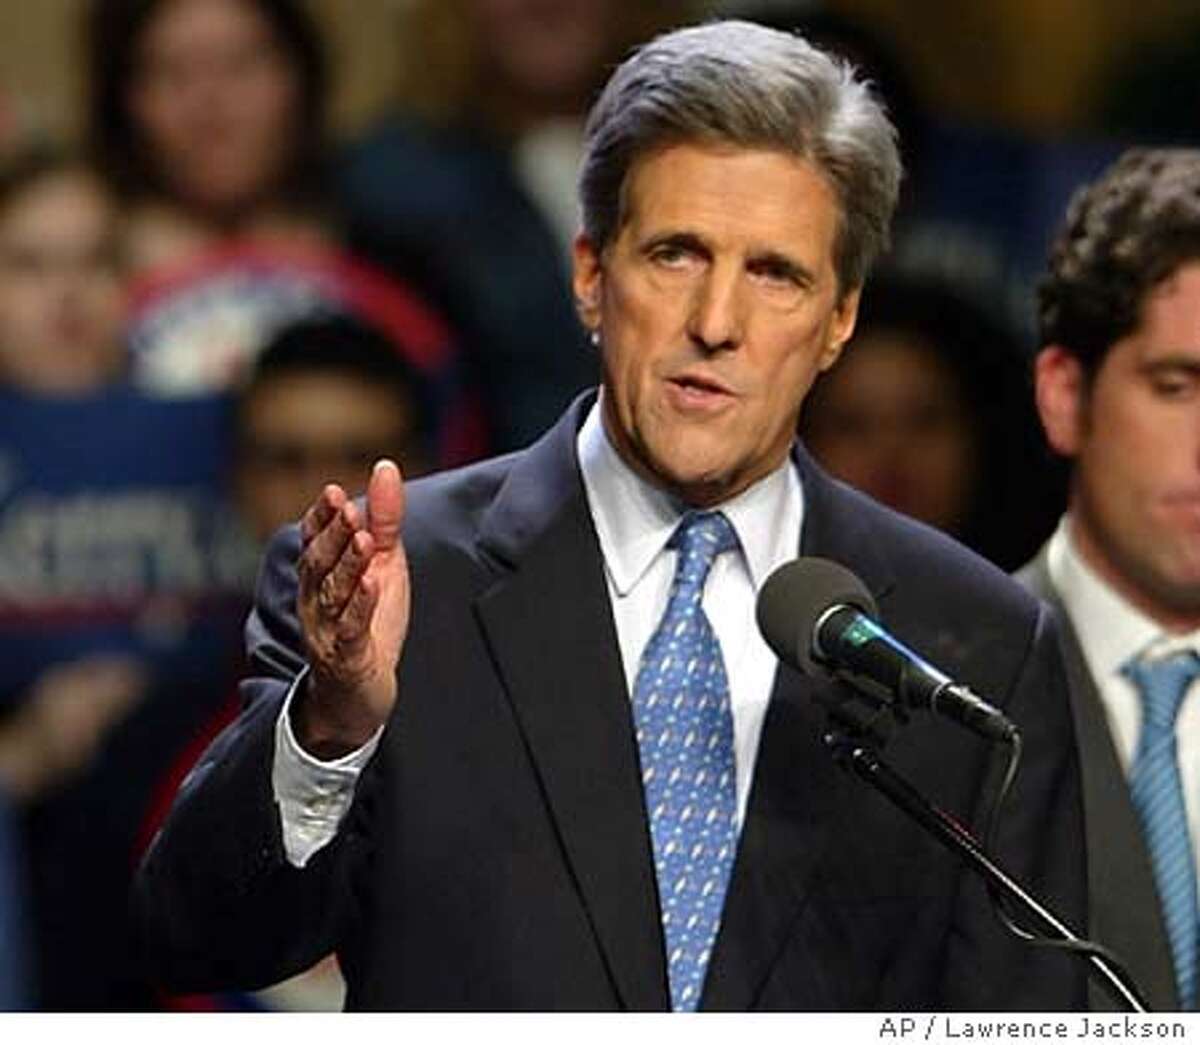 Democratic presidential hopeful Sen. John Kerry, D-Mass., makes remarks on the victories of his campaign for the Democratic presidential nomination, Tuesday, March 2, 2004, in Washington. (AP Photo/Lawrence Jackson)